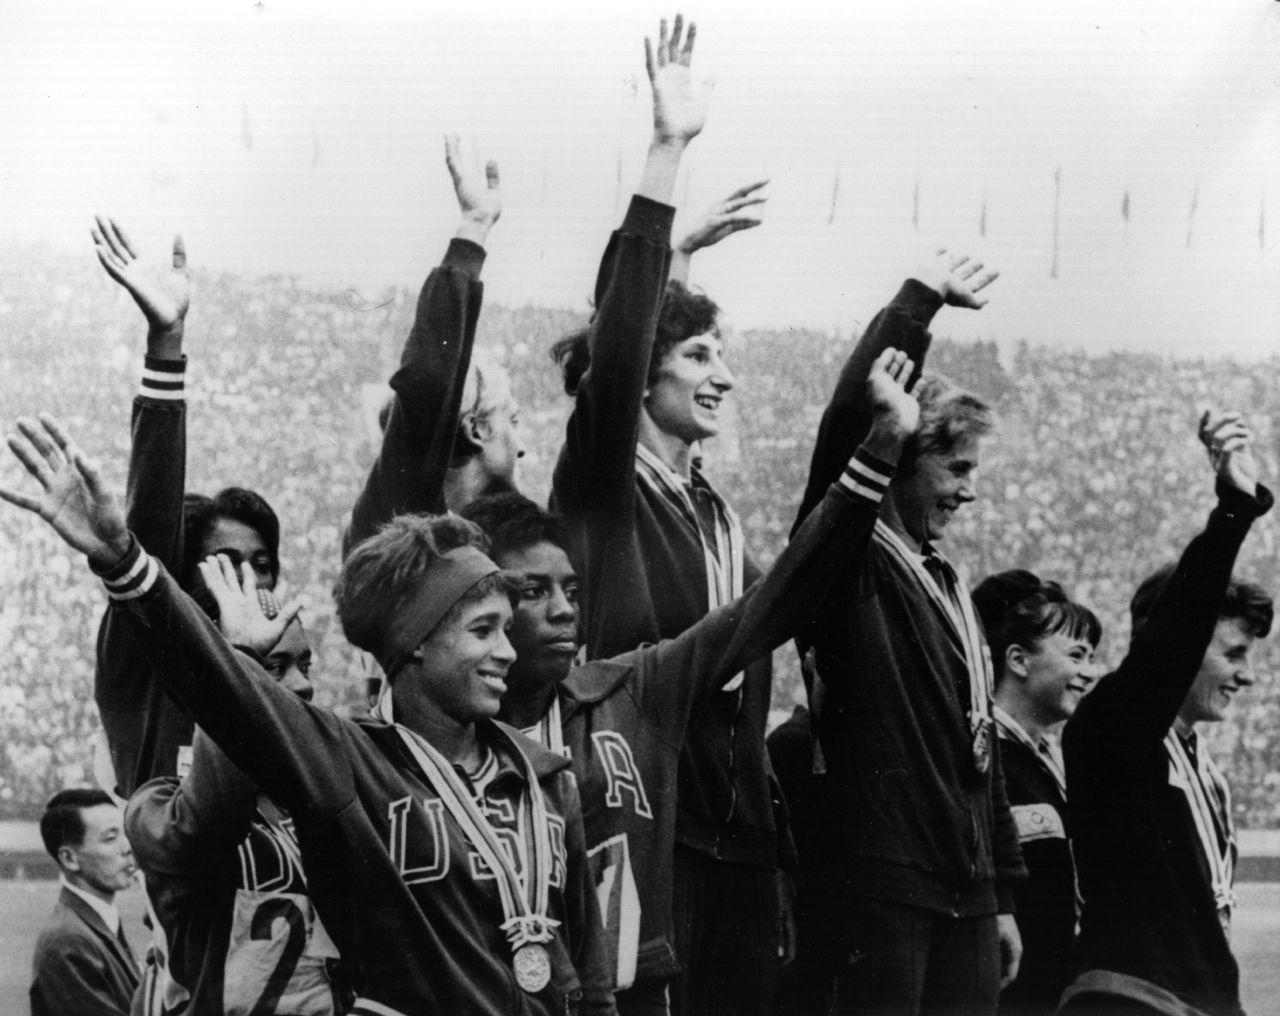 October 21, 1964: The Polish winners of the women's 4 x 100 meters relay race celebrate on the podium, with the American team who came second and the British team who came third.